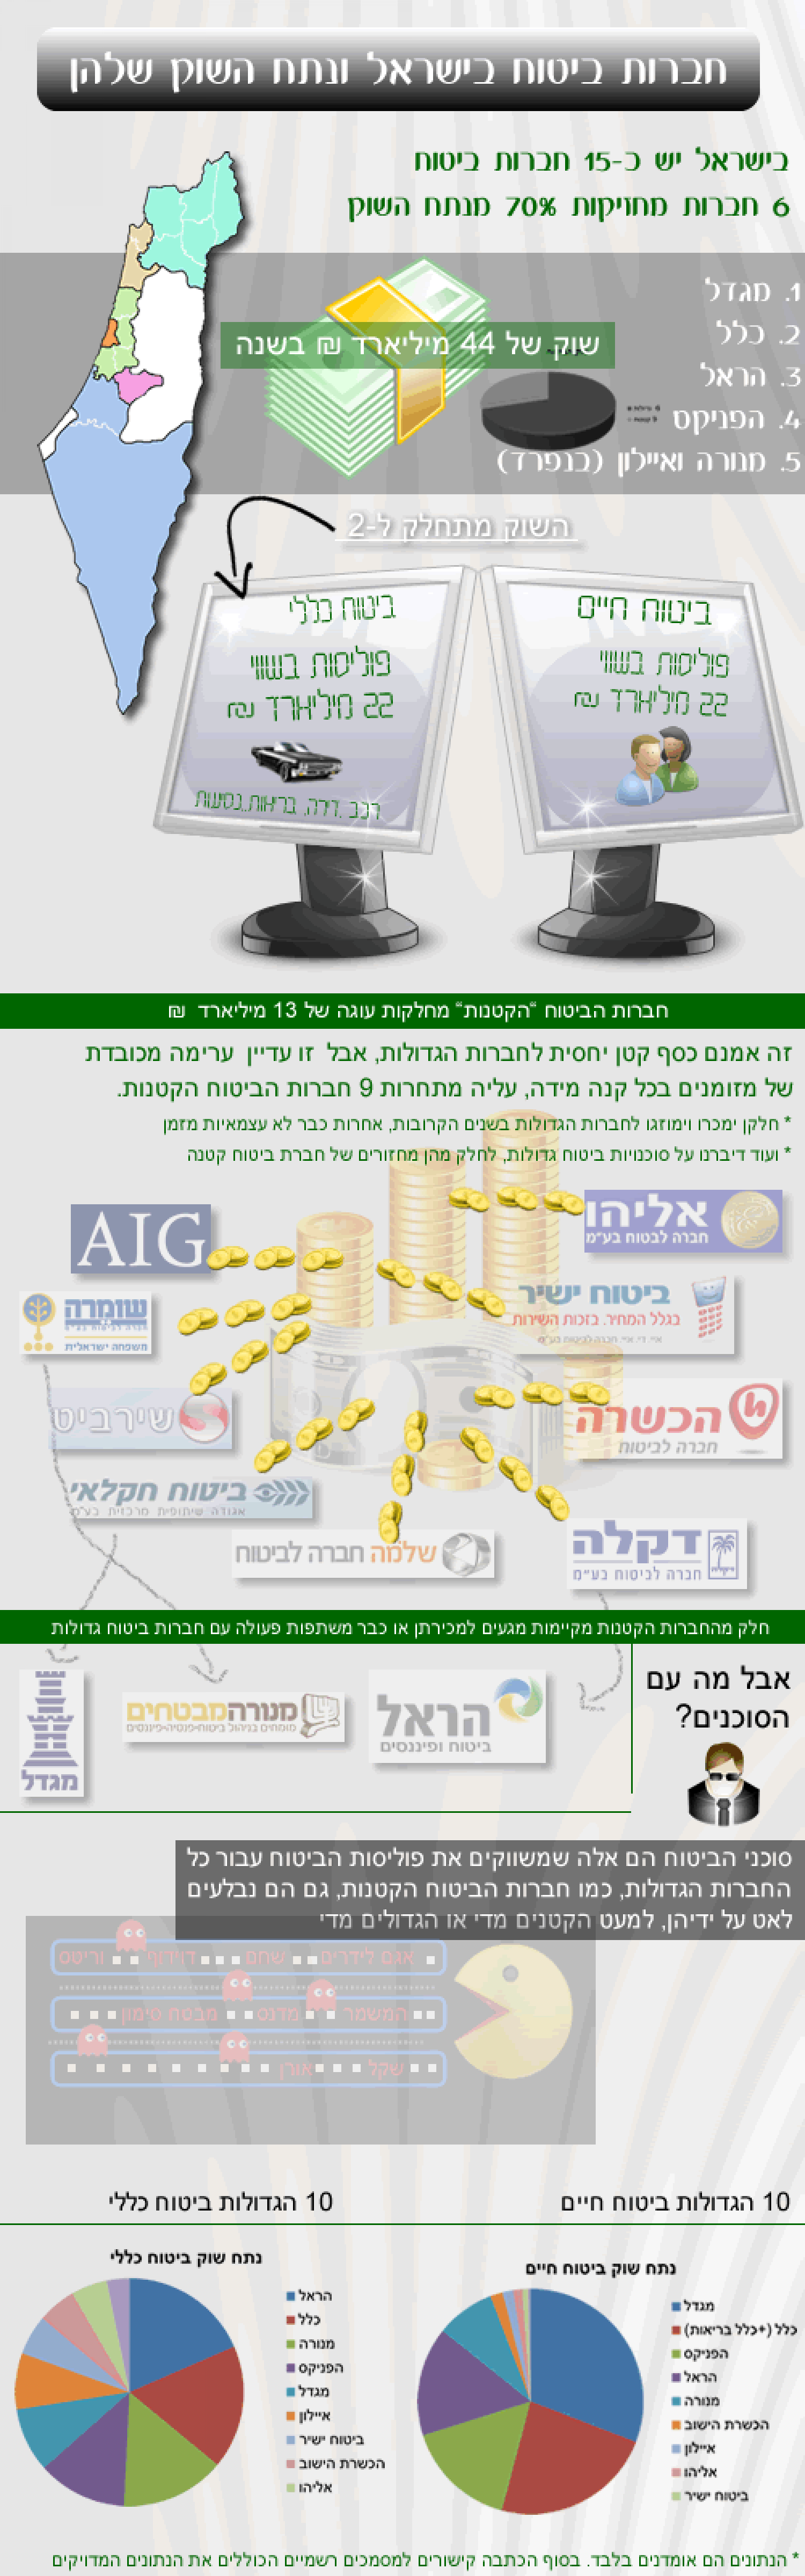 Car Insurance in Israel Infographic